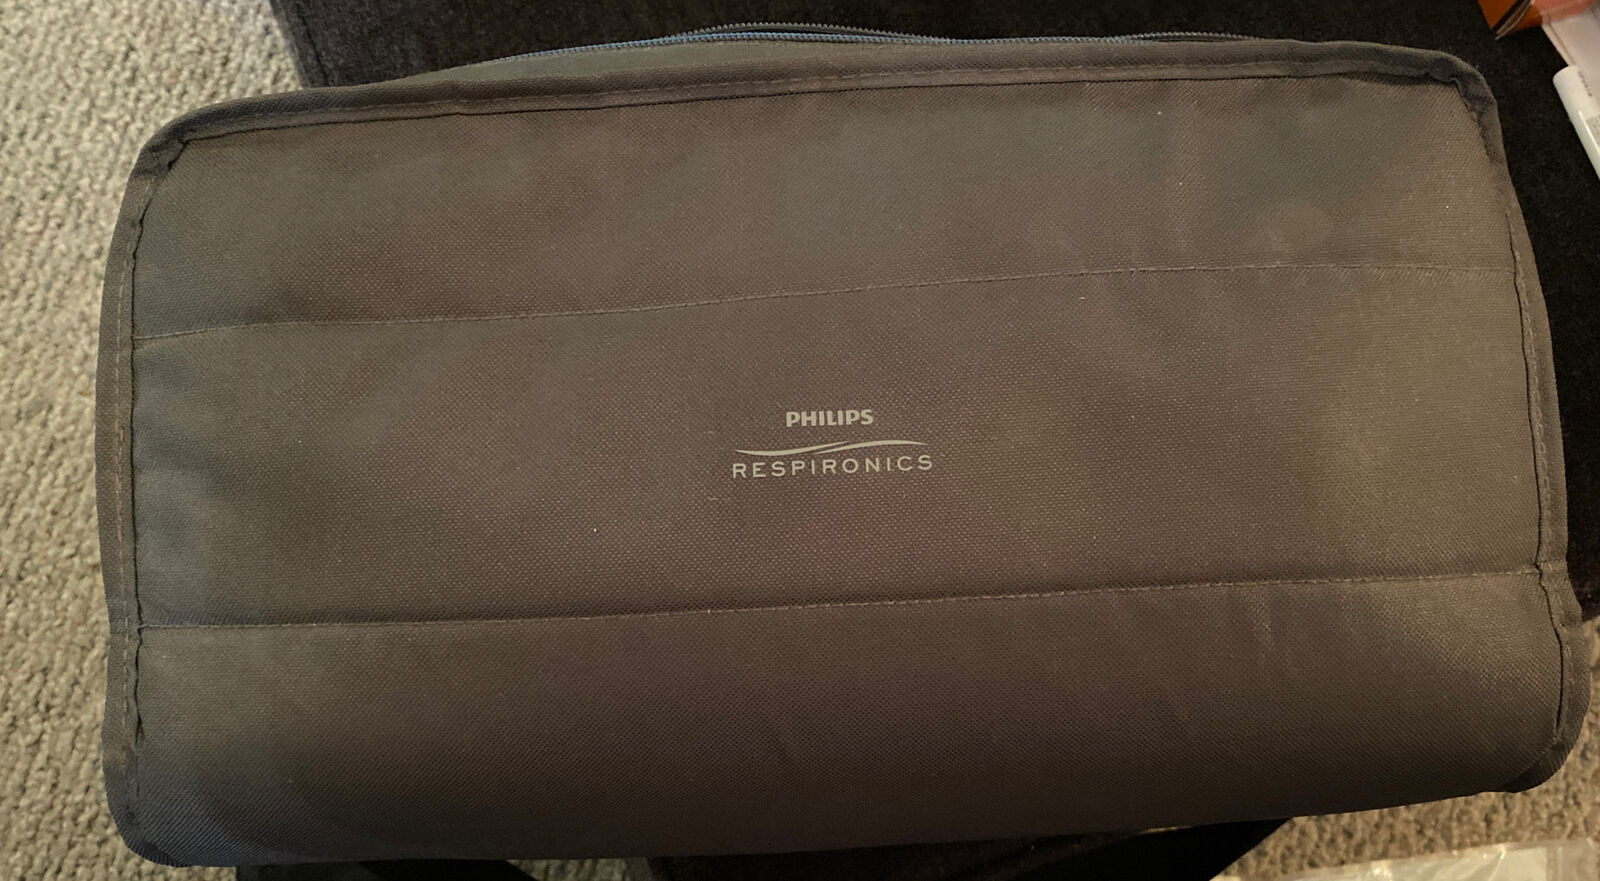 Philips Respironics Dreamstation Cpap Travel Bag Carrying Case Gray Bag Only